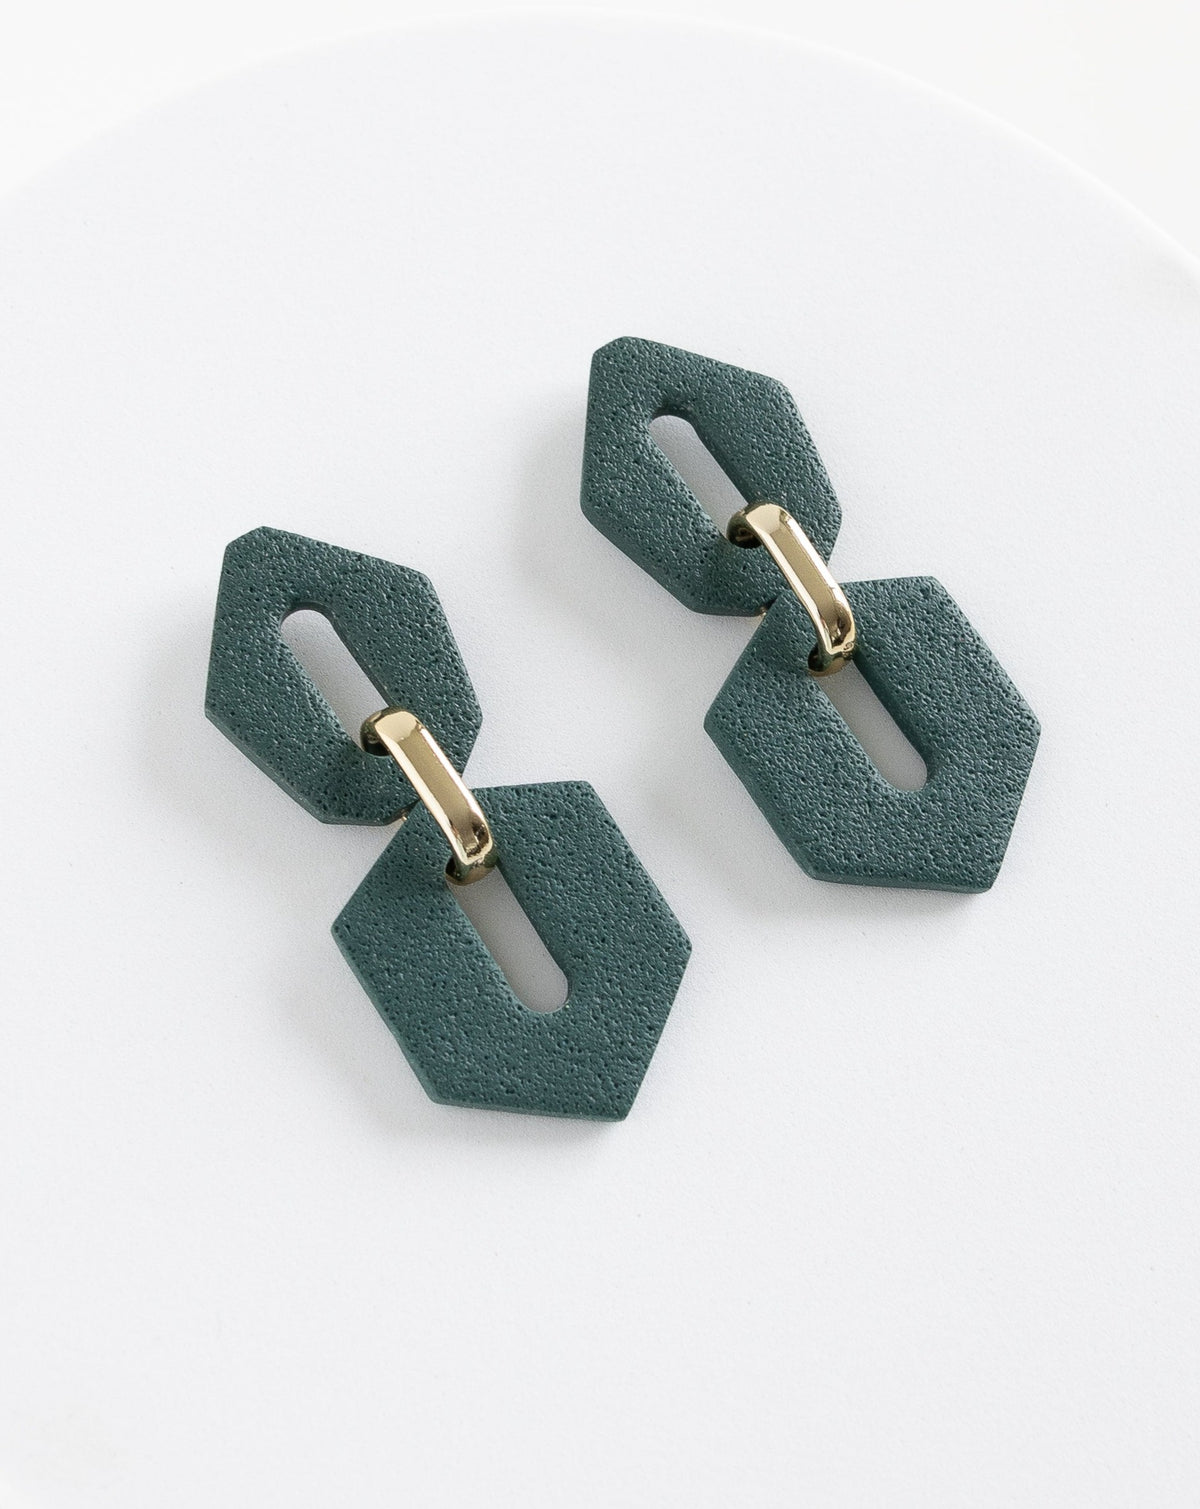 Angled view of Shilla earrings in Pine color.